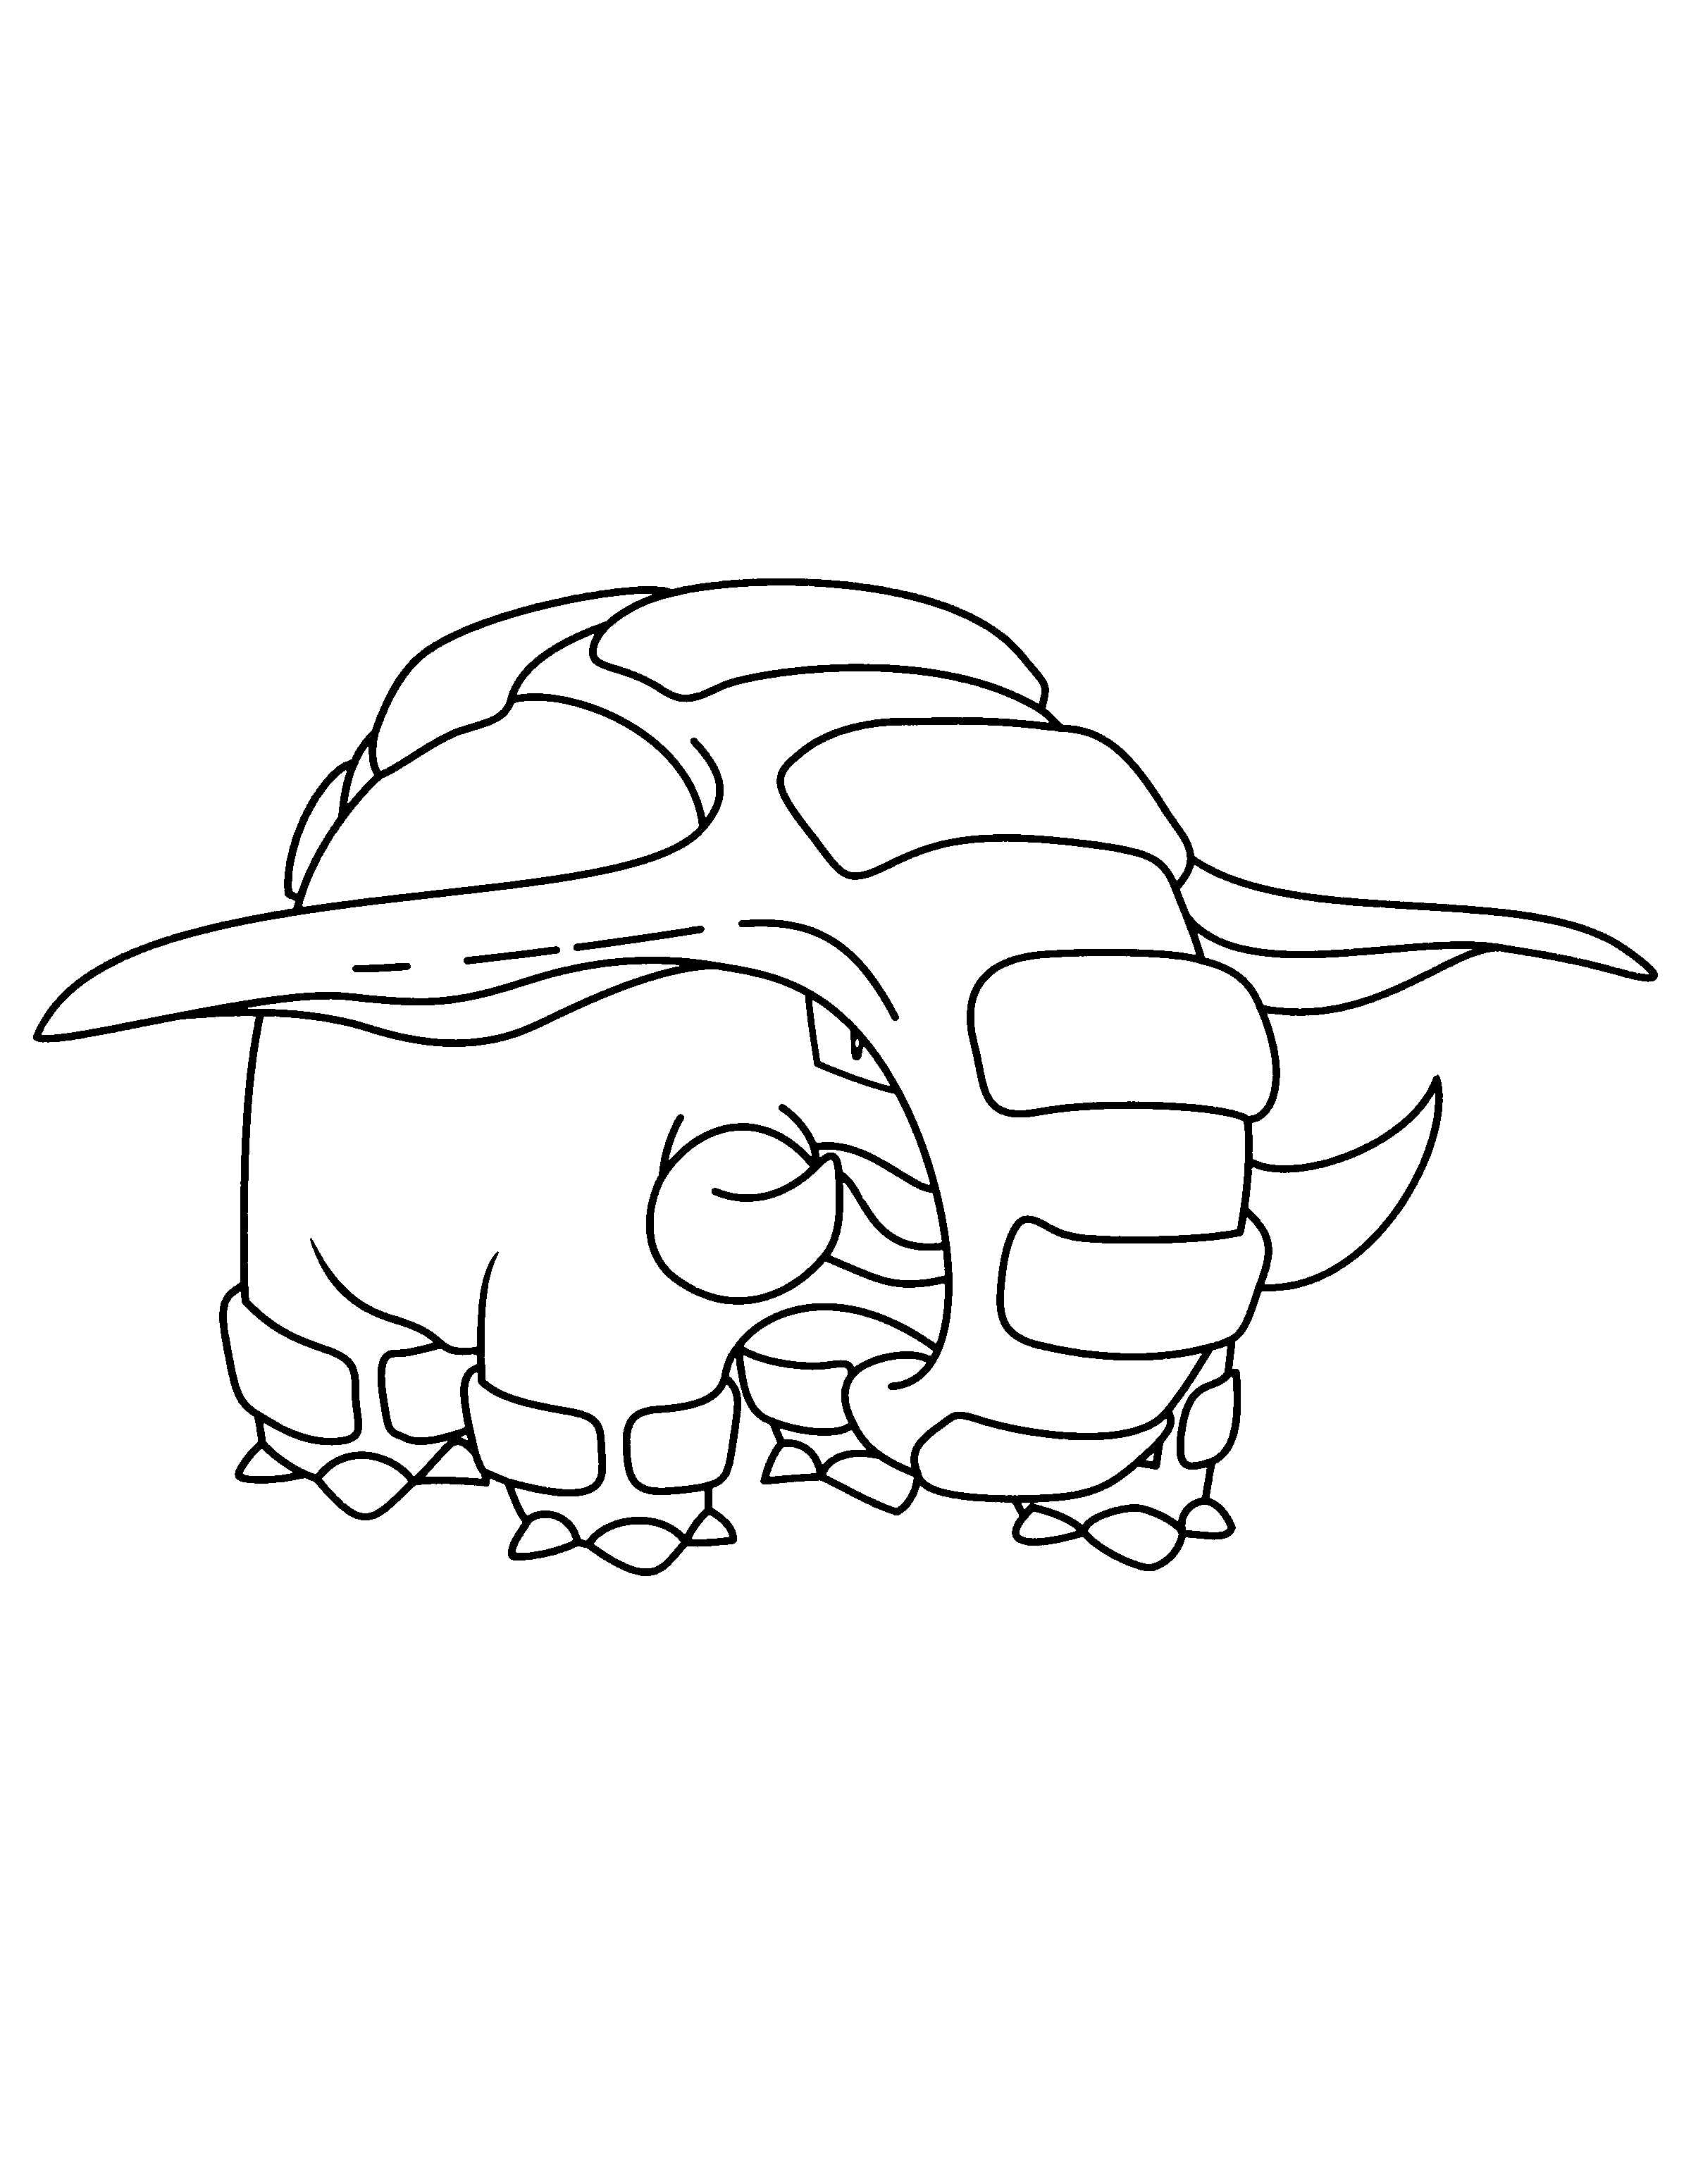 animated-coloring-pages-pokemon-image-0158